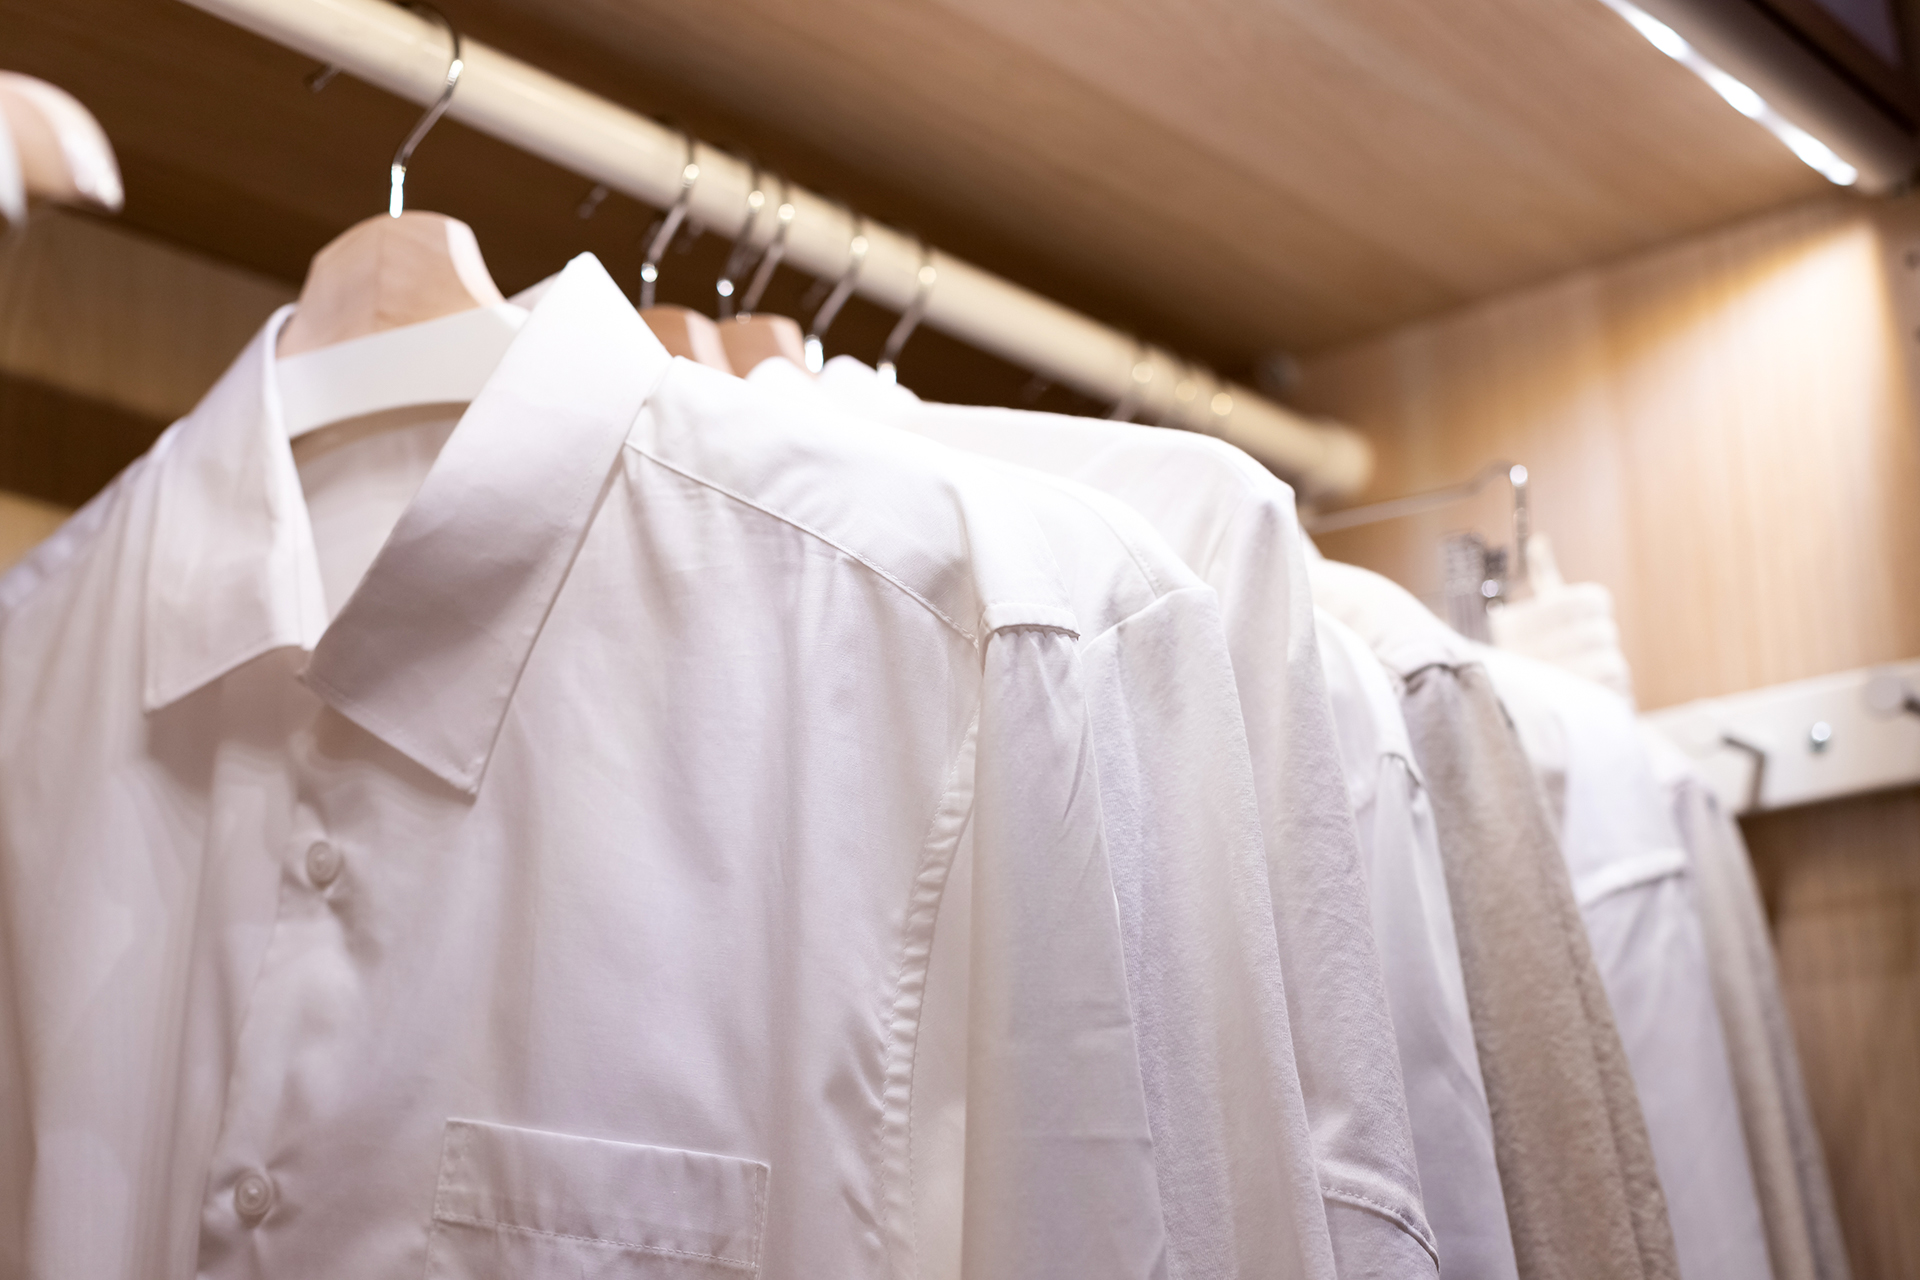 use high-quality wooden hangers to hang dress shirts